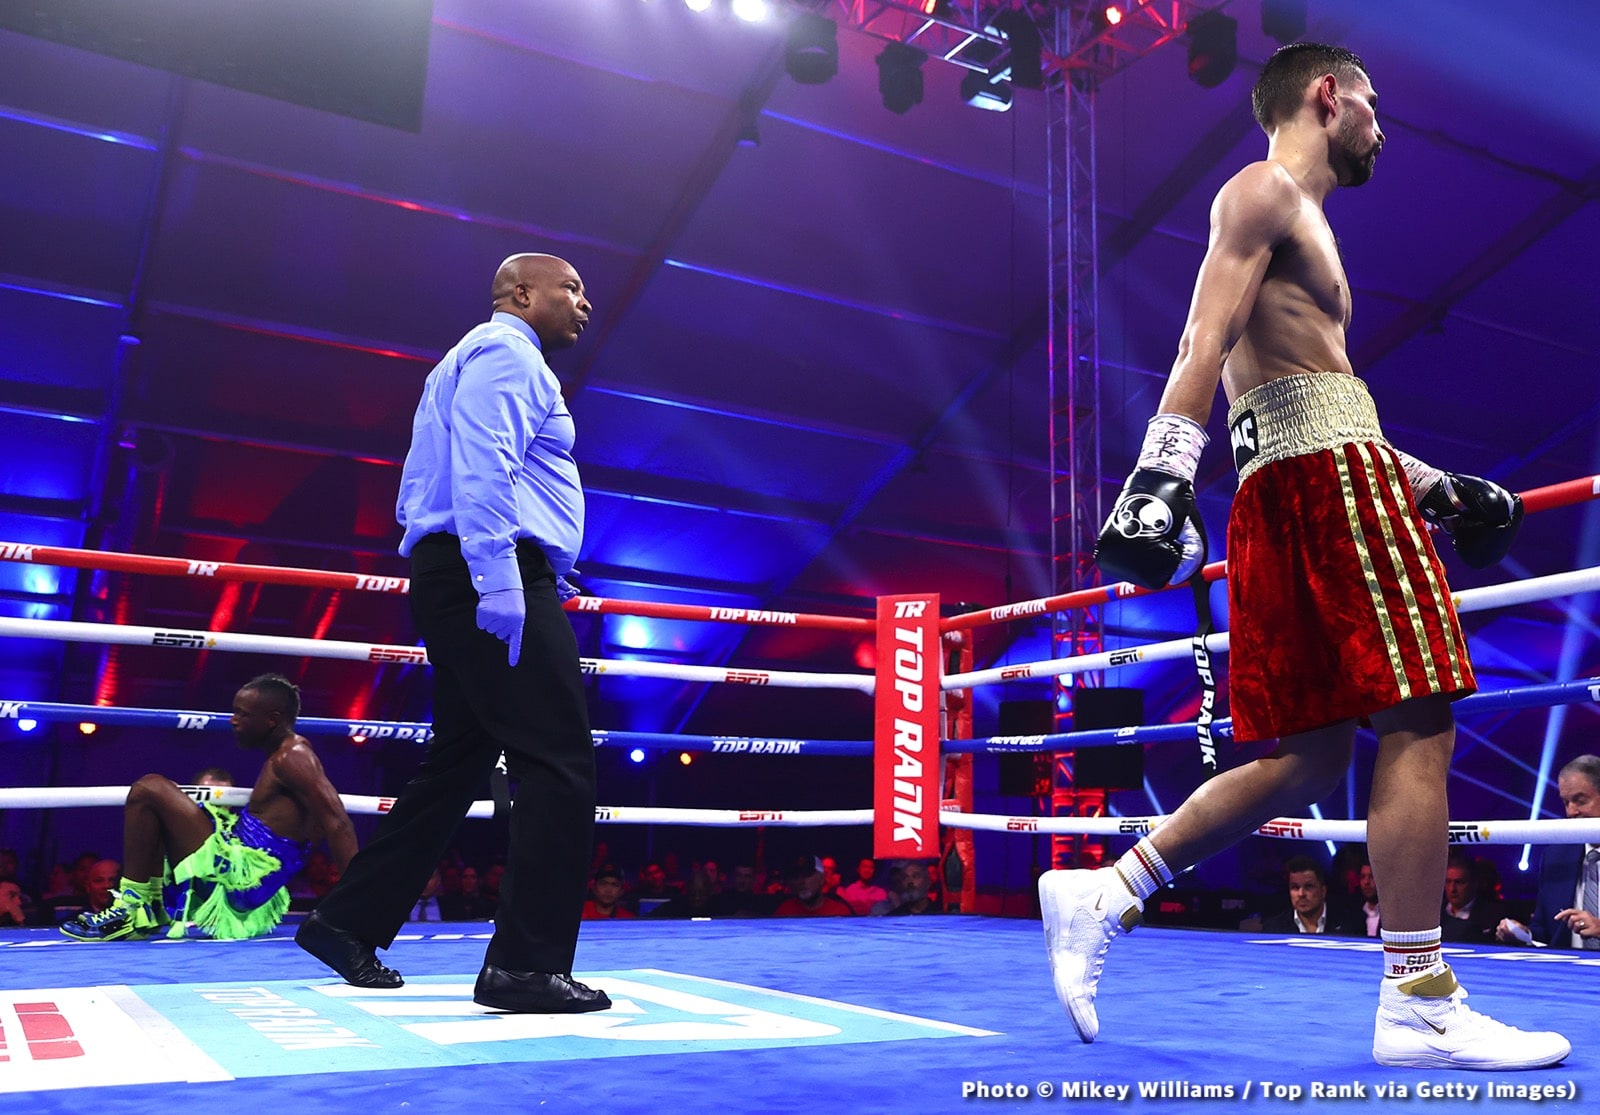 Janibek Alimkhanuly stops Danny Dignum by 2nd round KO - Boxing results